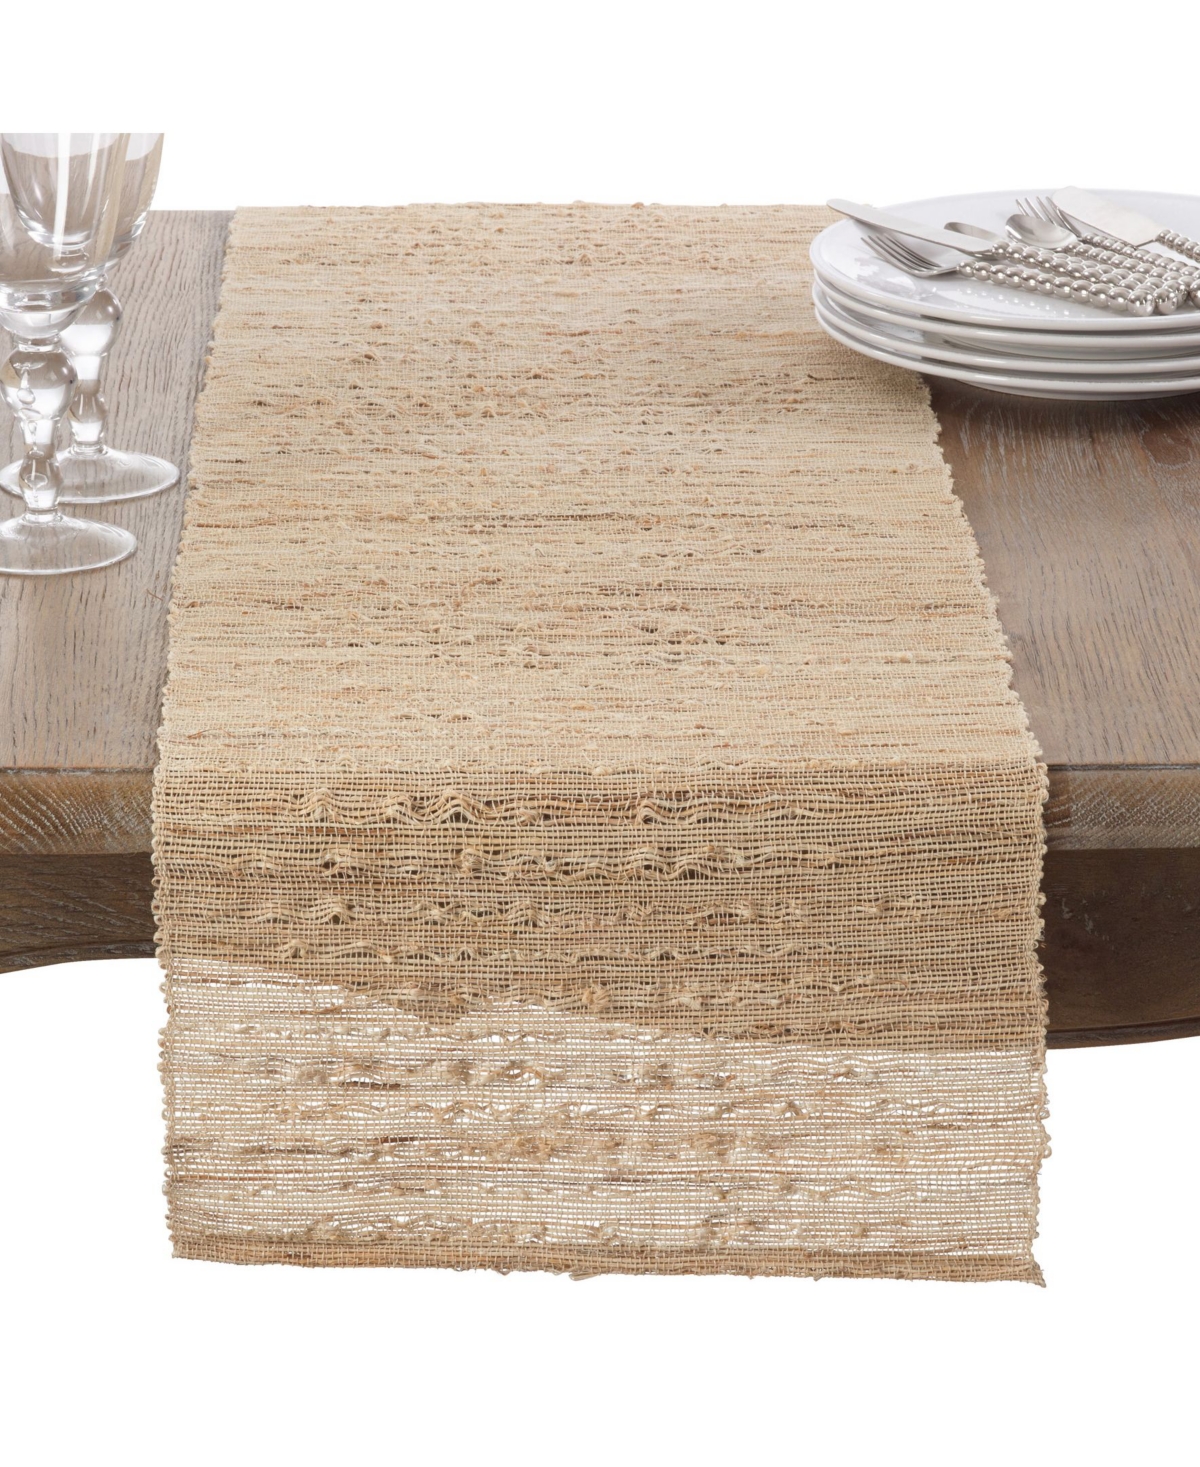 Saro Lifestyle Woven Nubby Natural Table Runner